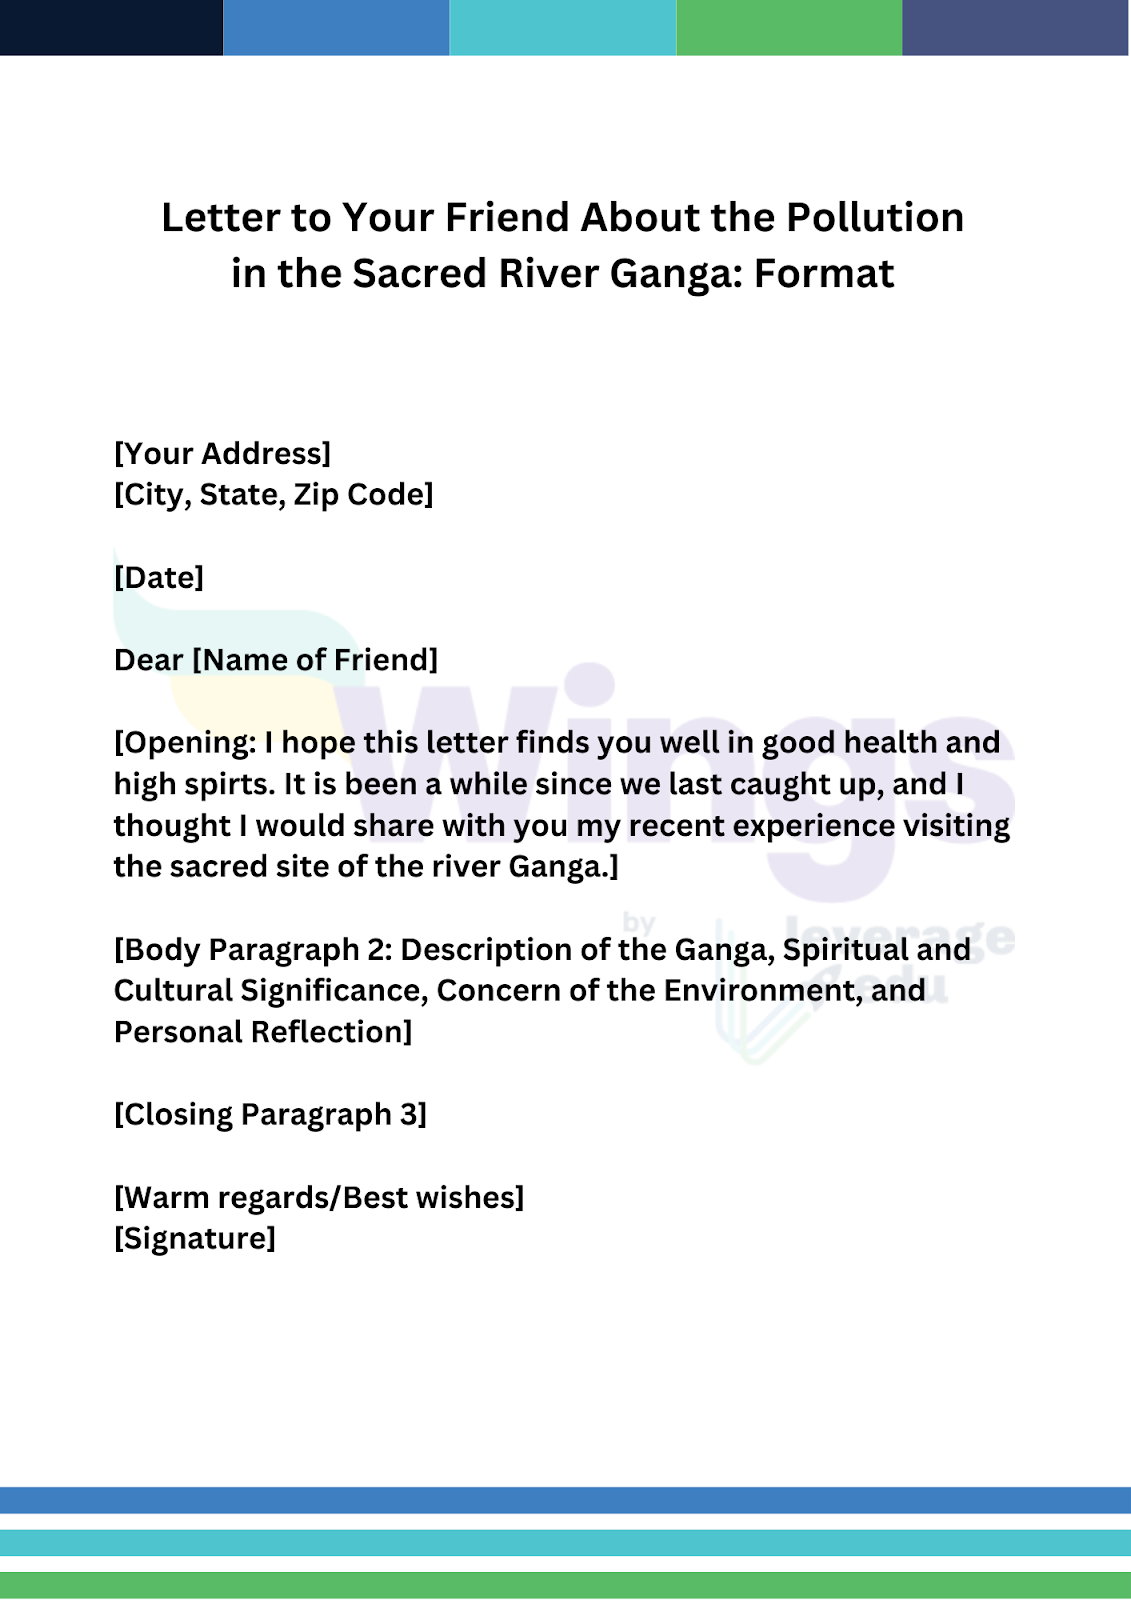 Write a Letter to Your Friend About the Pollution in the Sacred River Ganga